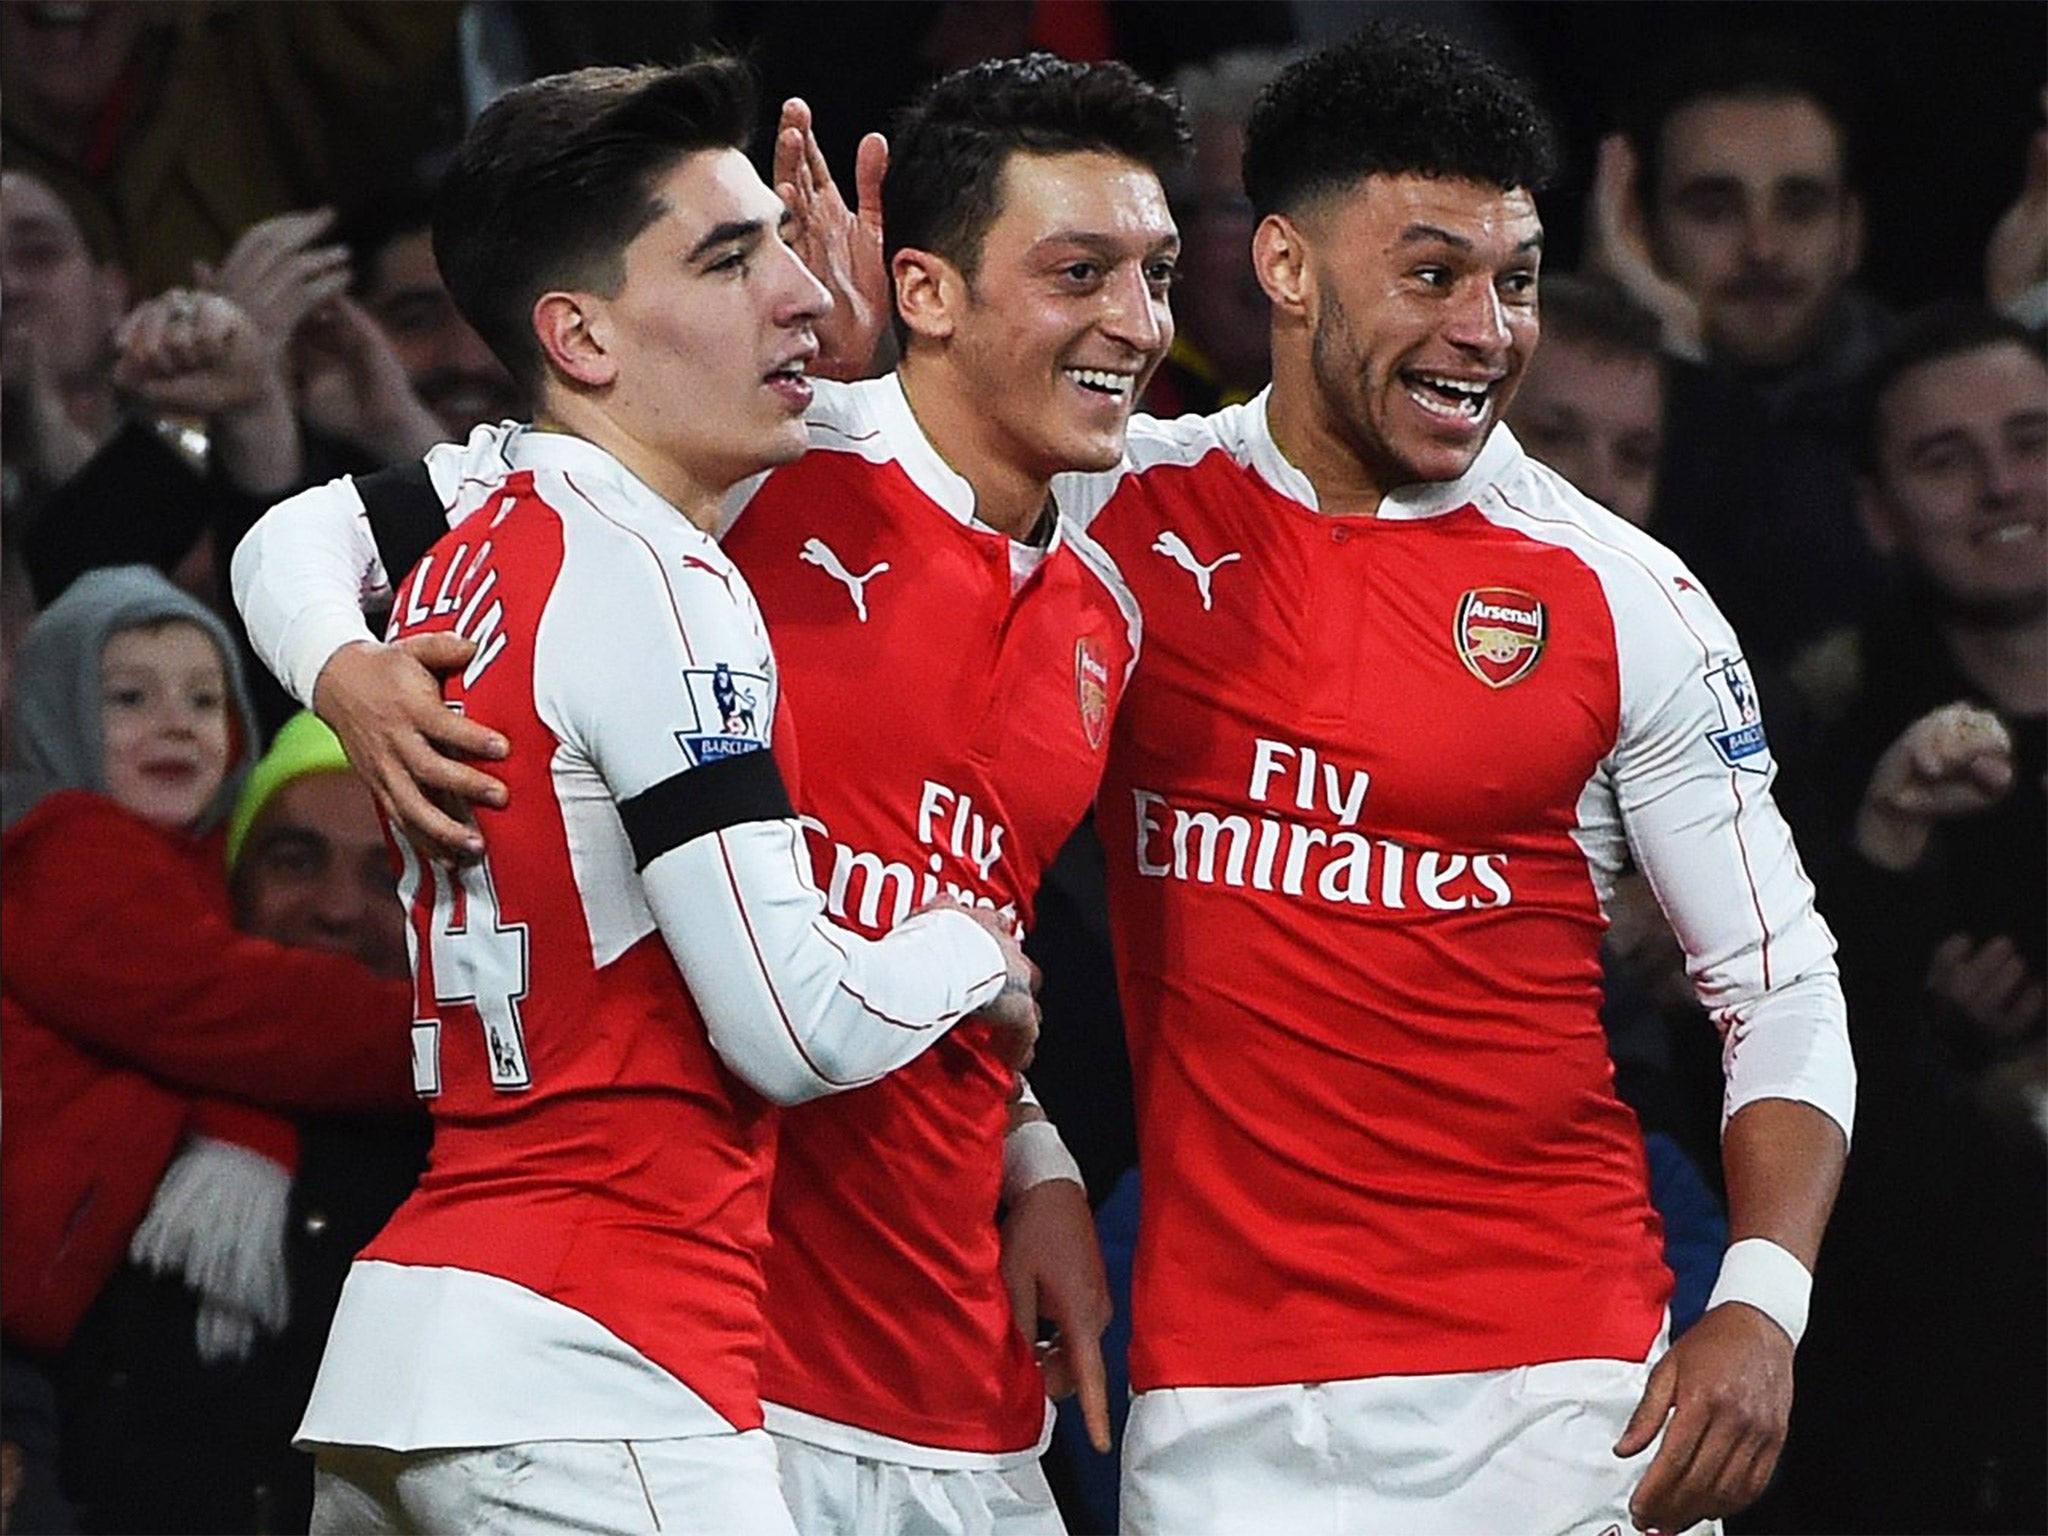 Mesut Özil is congratulated by Hector Bellerin and Alex Oxlade-Chamberlain after scoring against Bournemouth